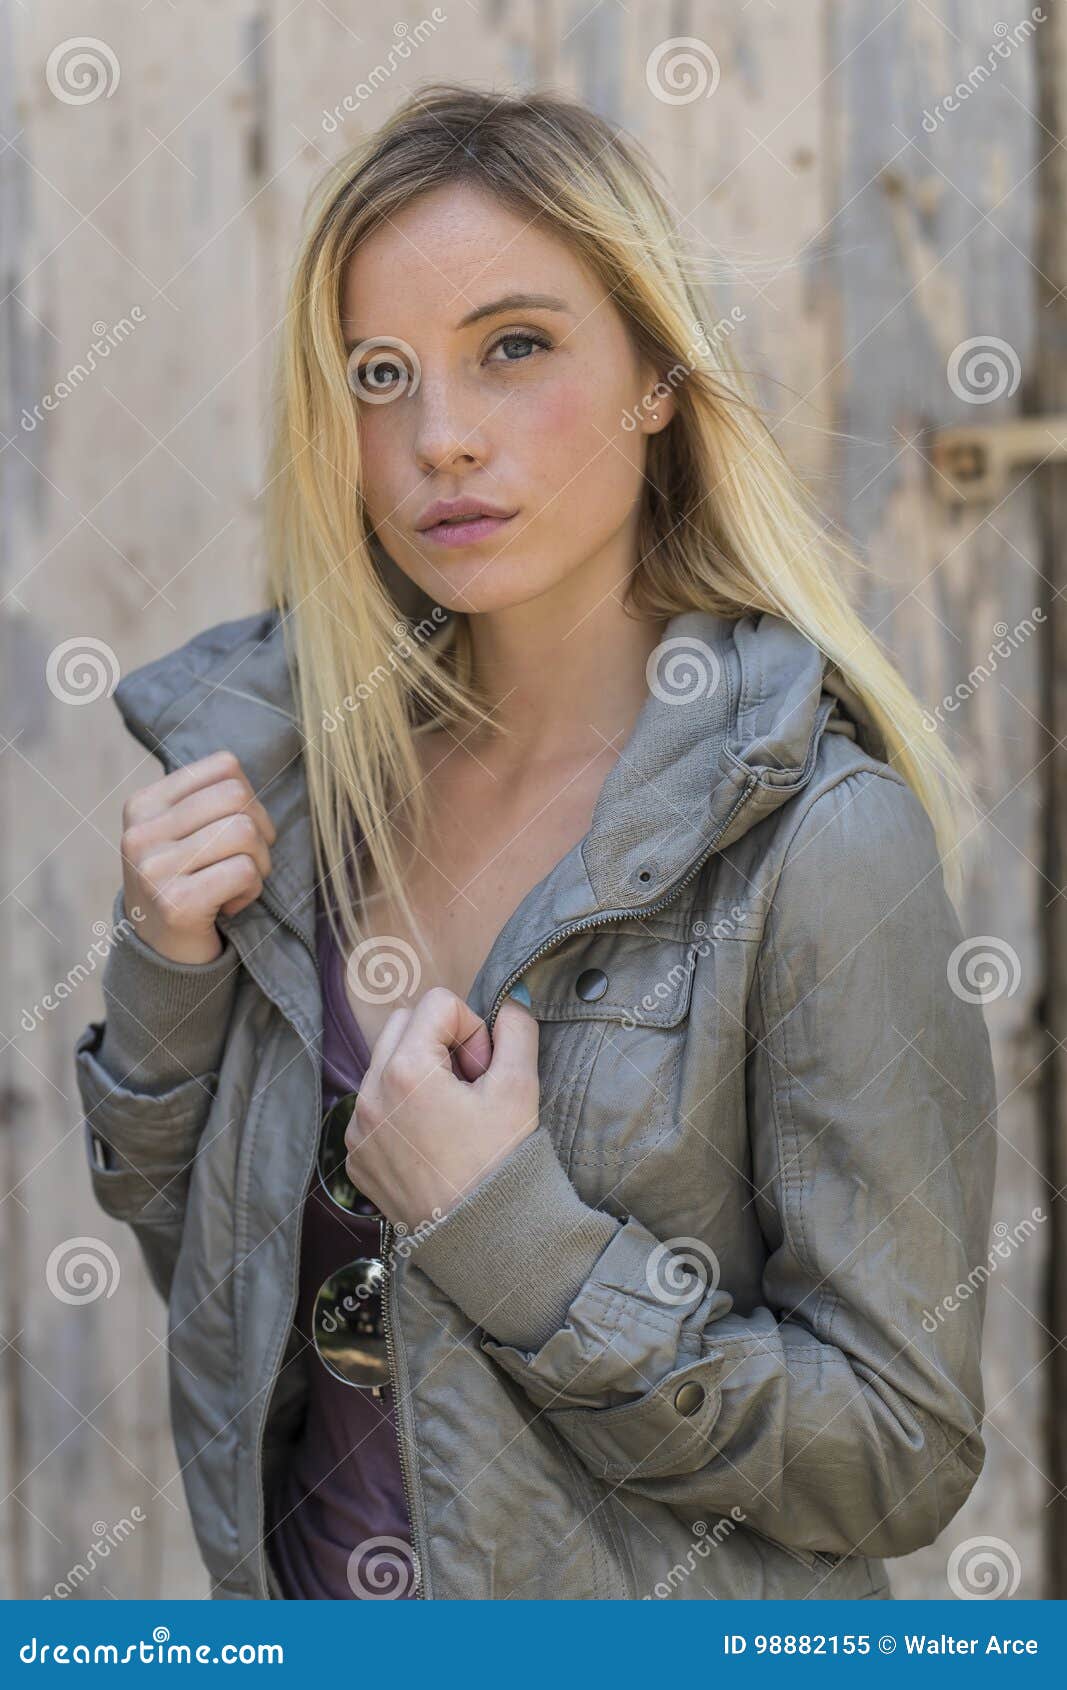 Blonde Model Posing Outdoors Stock Image Image Of Holiday Caucasian 98882155